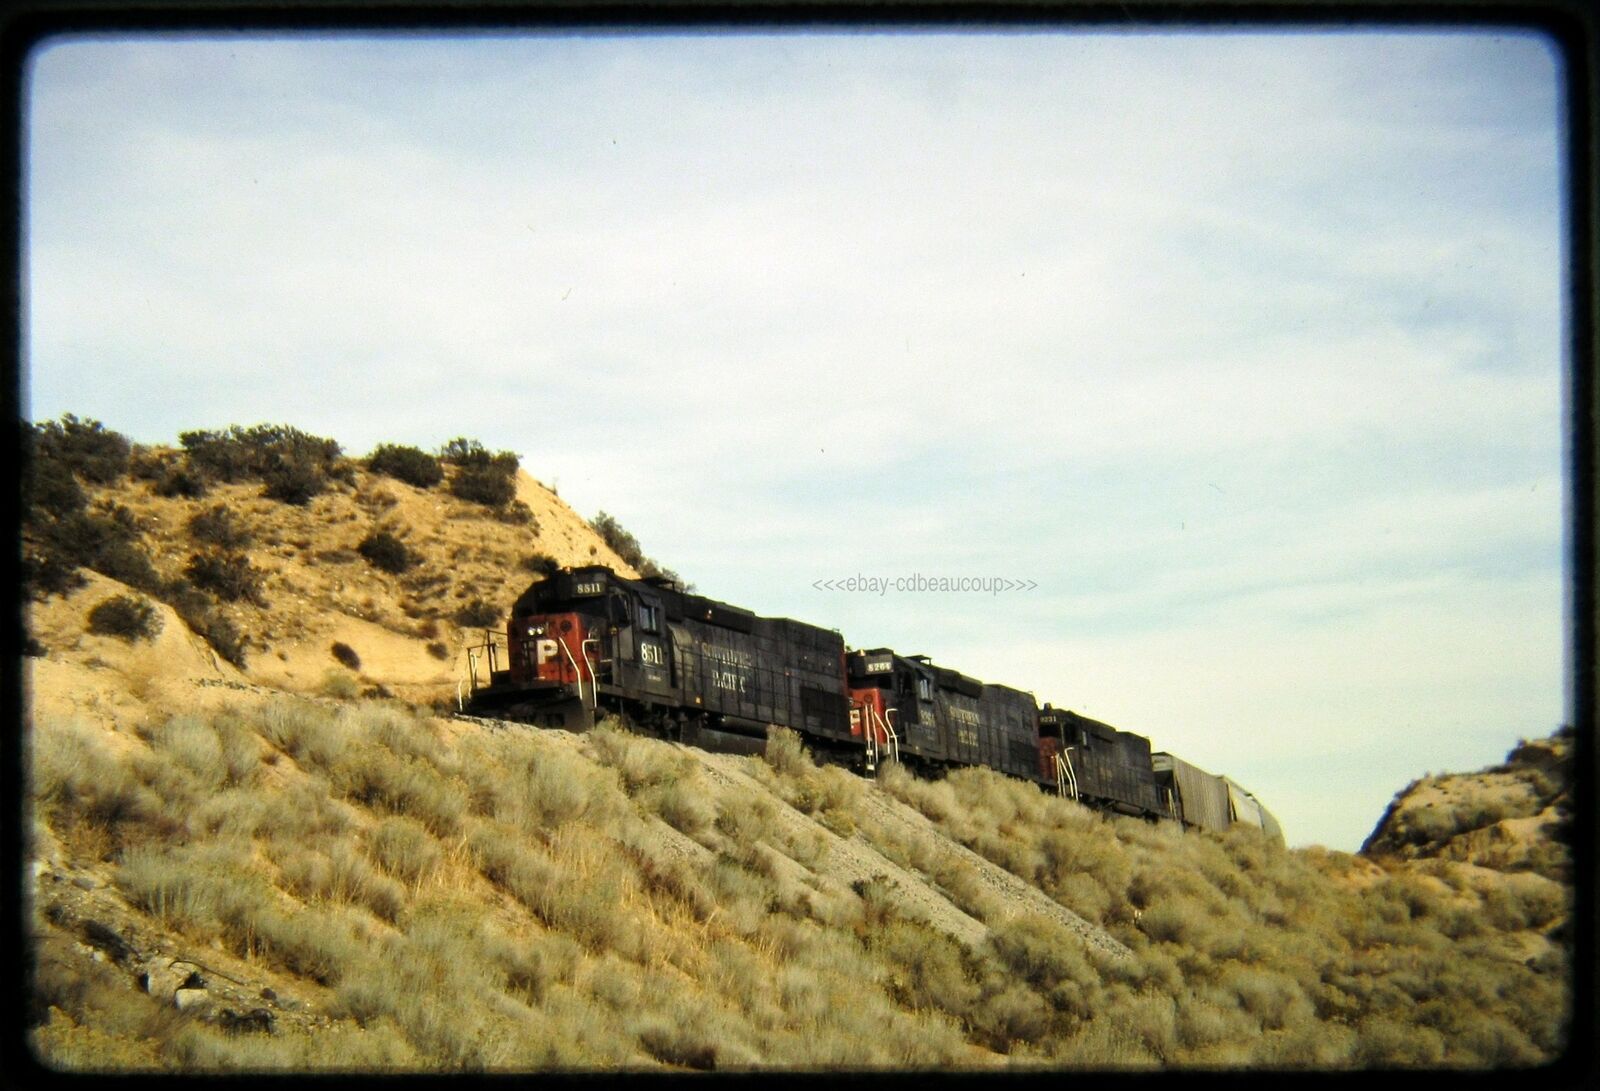 Railroad Slide Southern Pacific SP 8511 on Freight Summit CA 1991